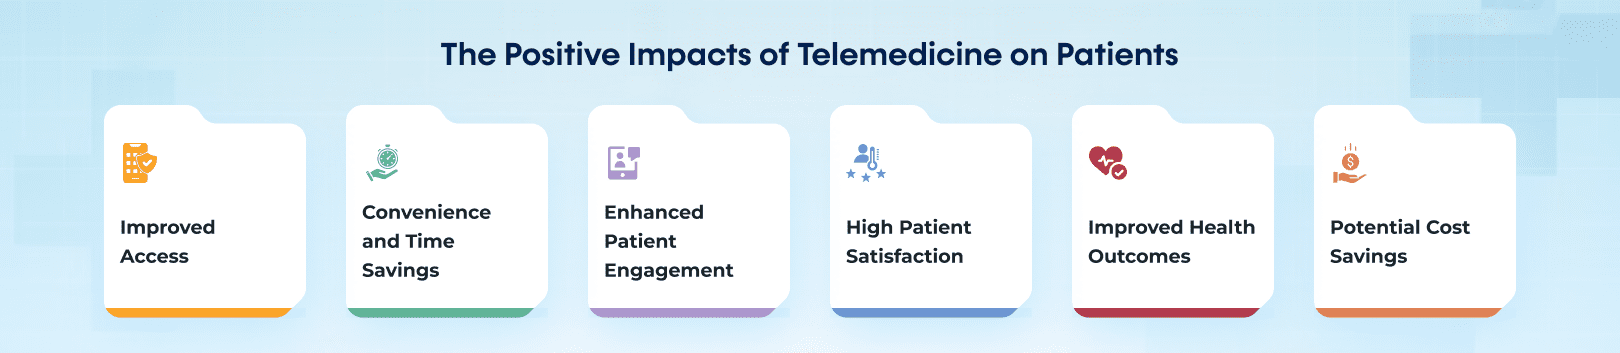 The Positive Impacts of Telemedicine on Patients